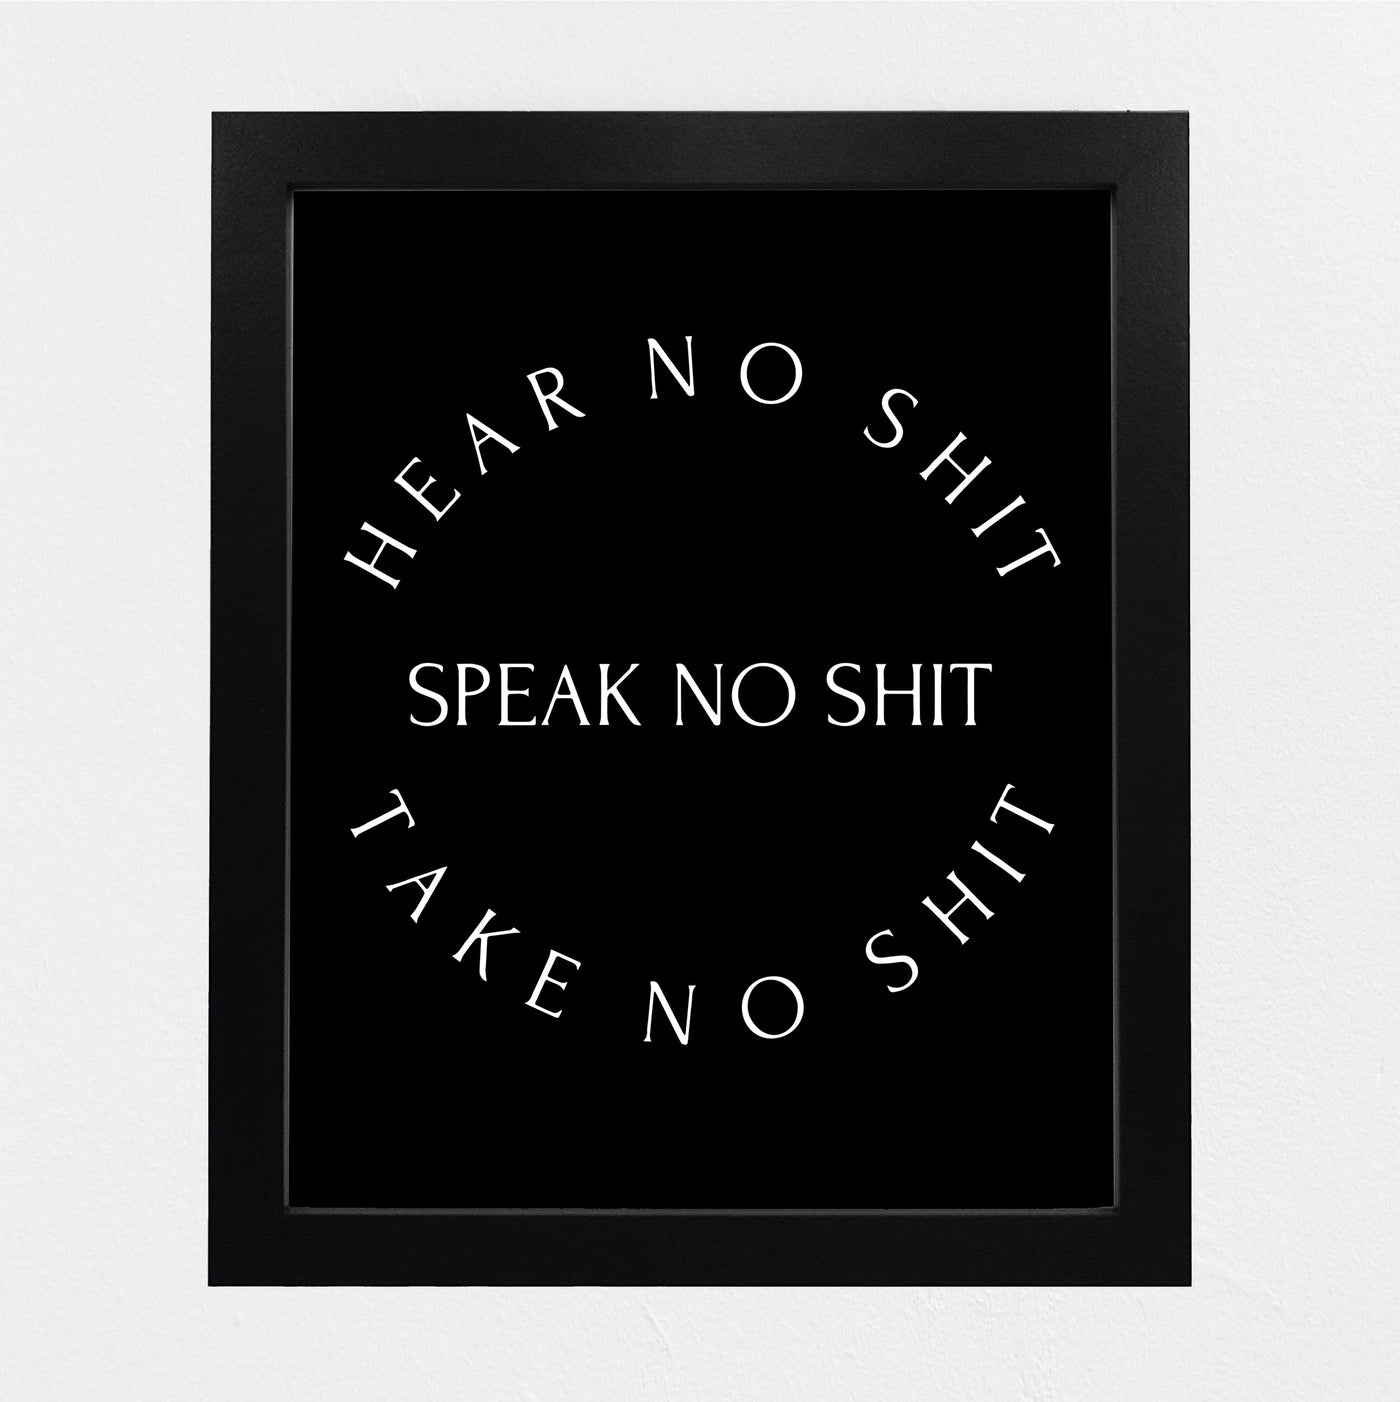 Hear-Speak-Take No Sh!t Funny Wall Art Sign -8 x 10" Black & White Typography Poster Print -Ready to Frame. Sarcastic Decoration for Home-Office-Bar-Shop-Cave Decor. Fun Gift for Family & Friends!